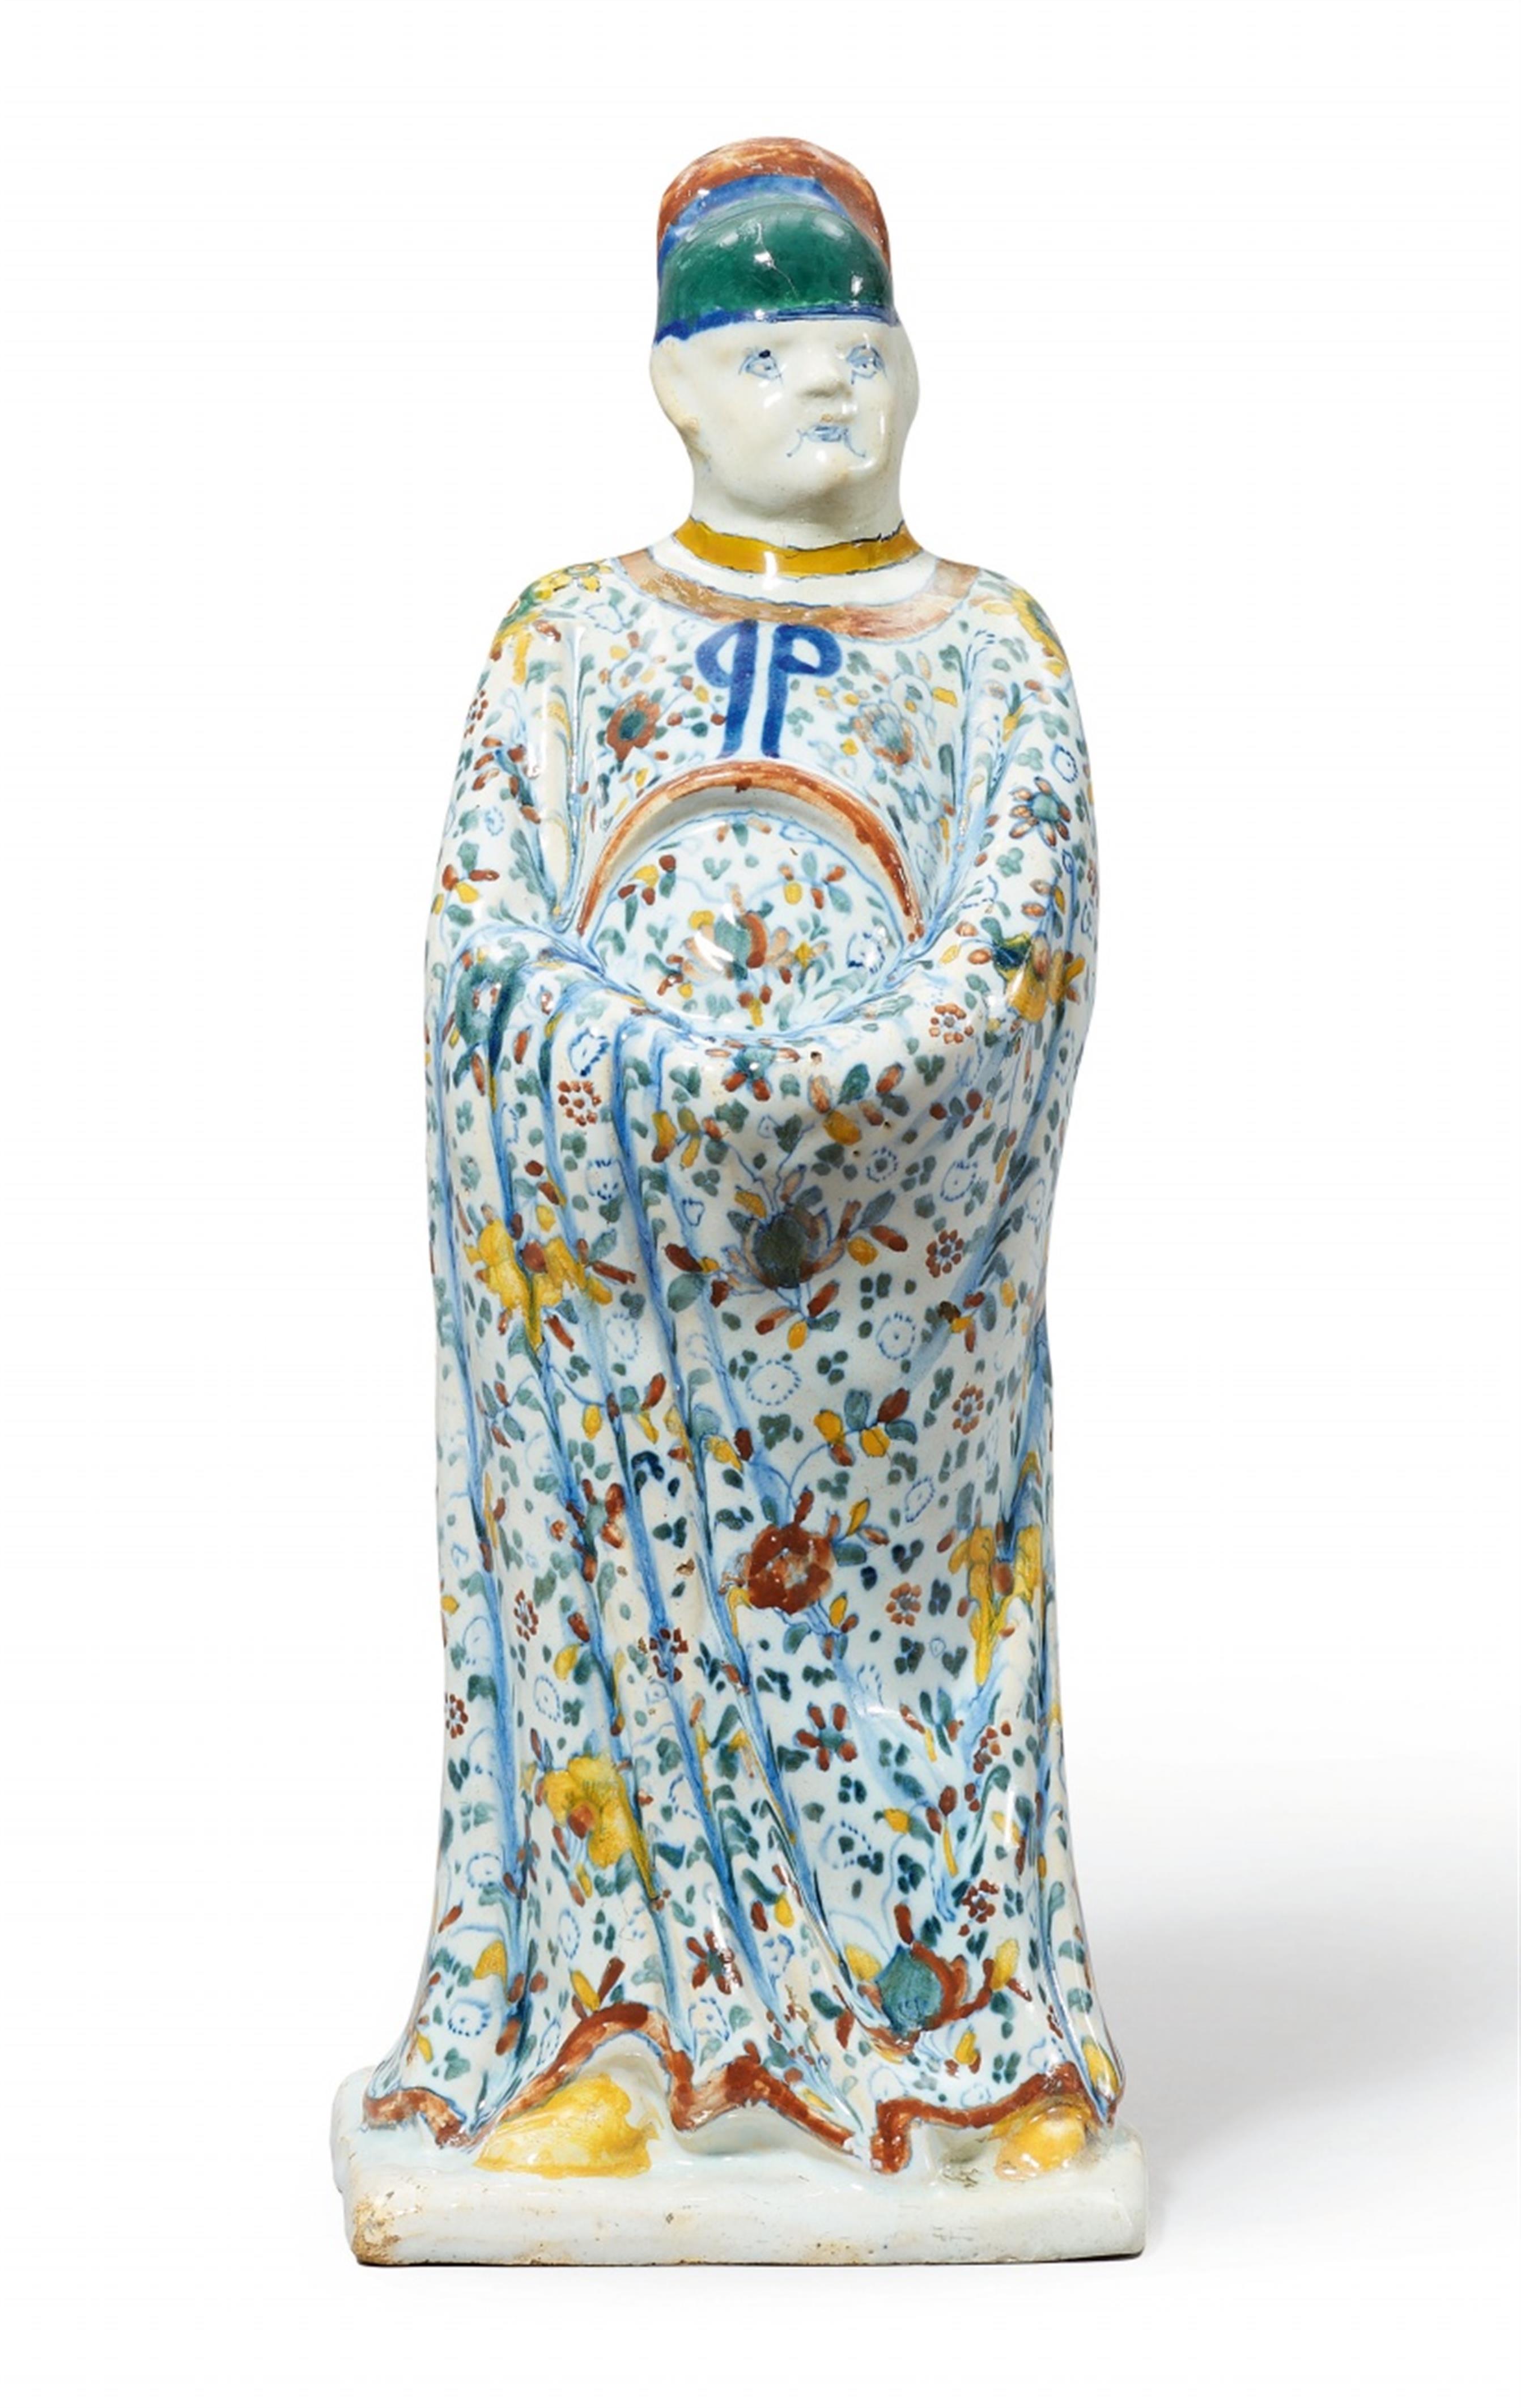 A rare Berlin faience figure of a Chinese official - image-1